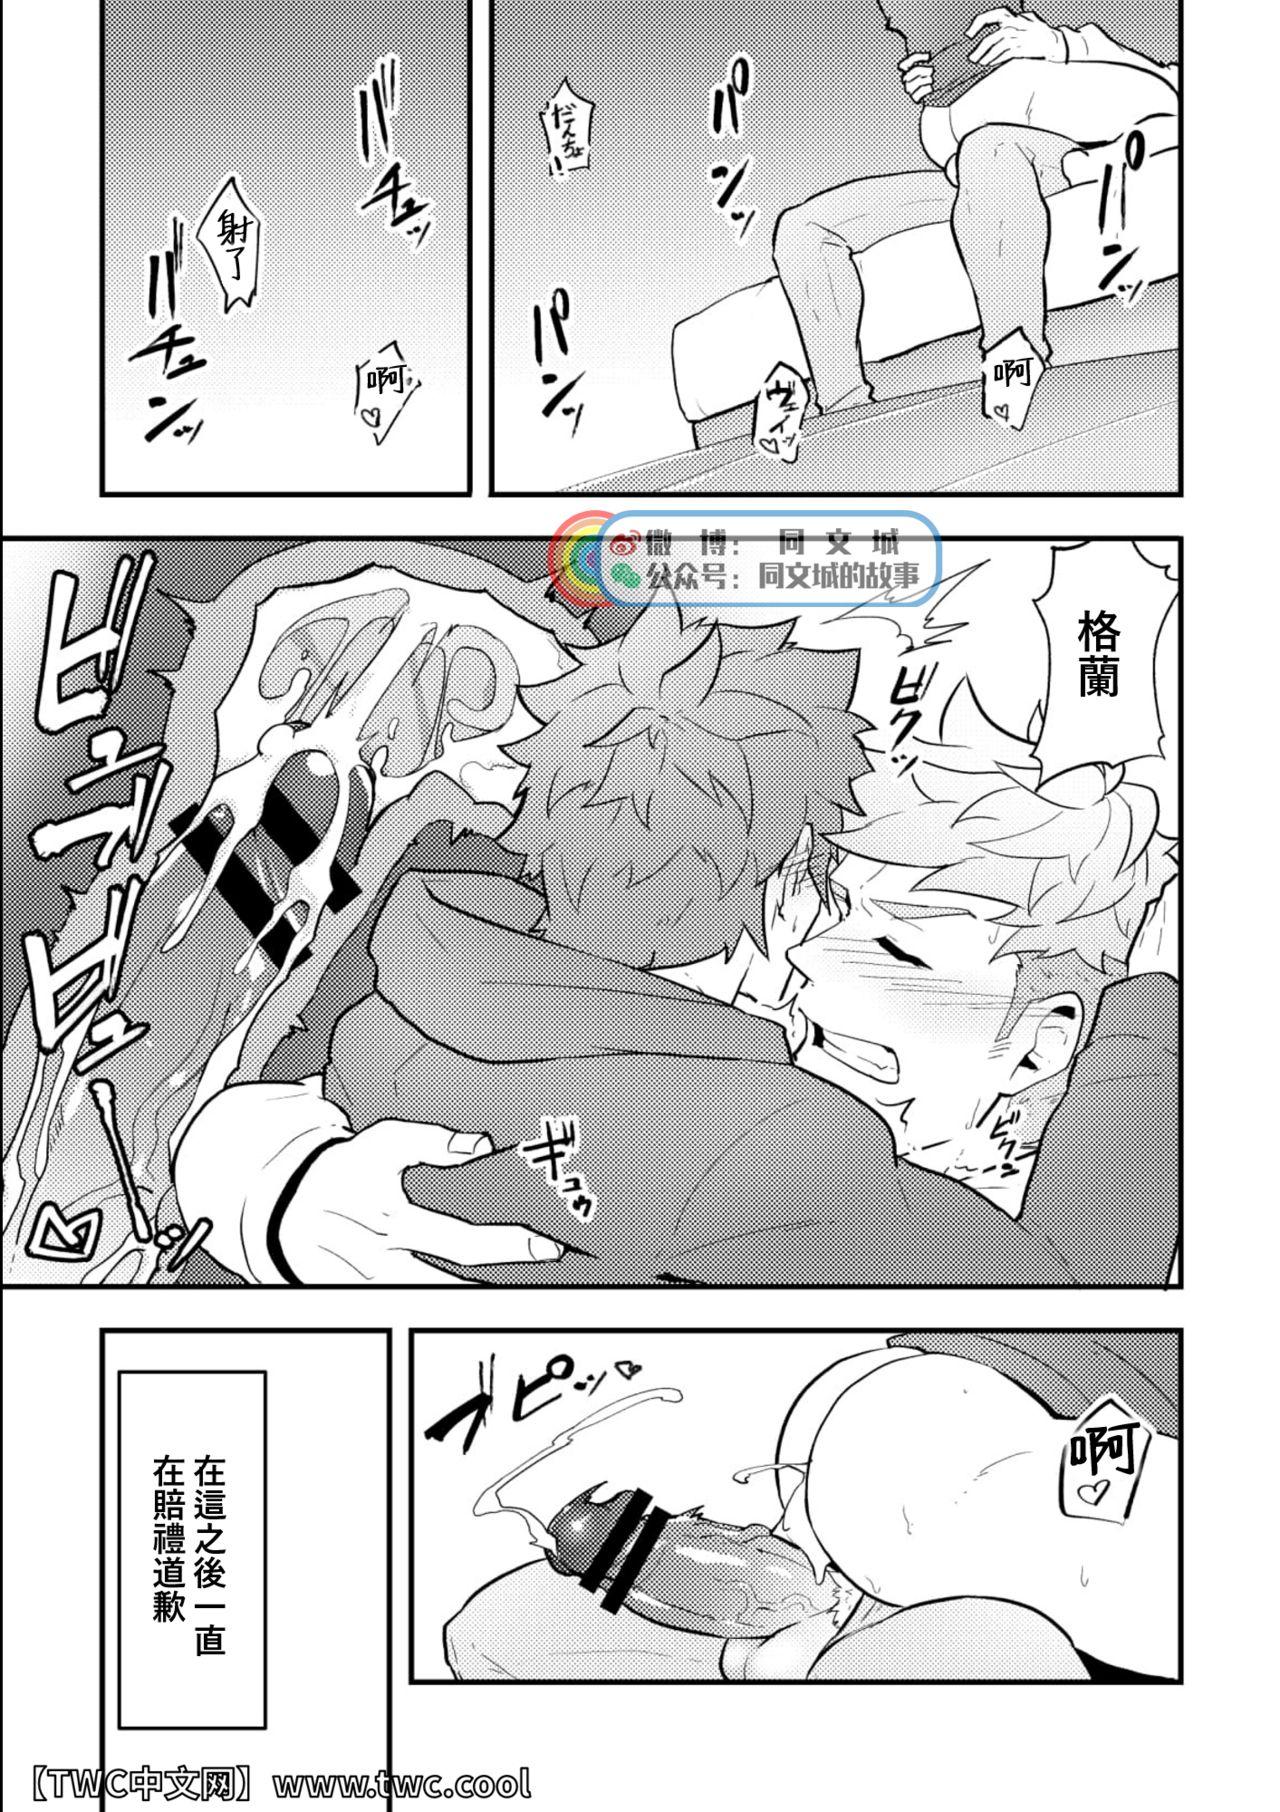 Bj Onabe Hon C95 - Granblue fantasy Punch out Pokemon | pocket monsters Fucking Sex - Page 5